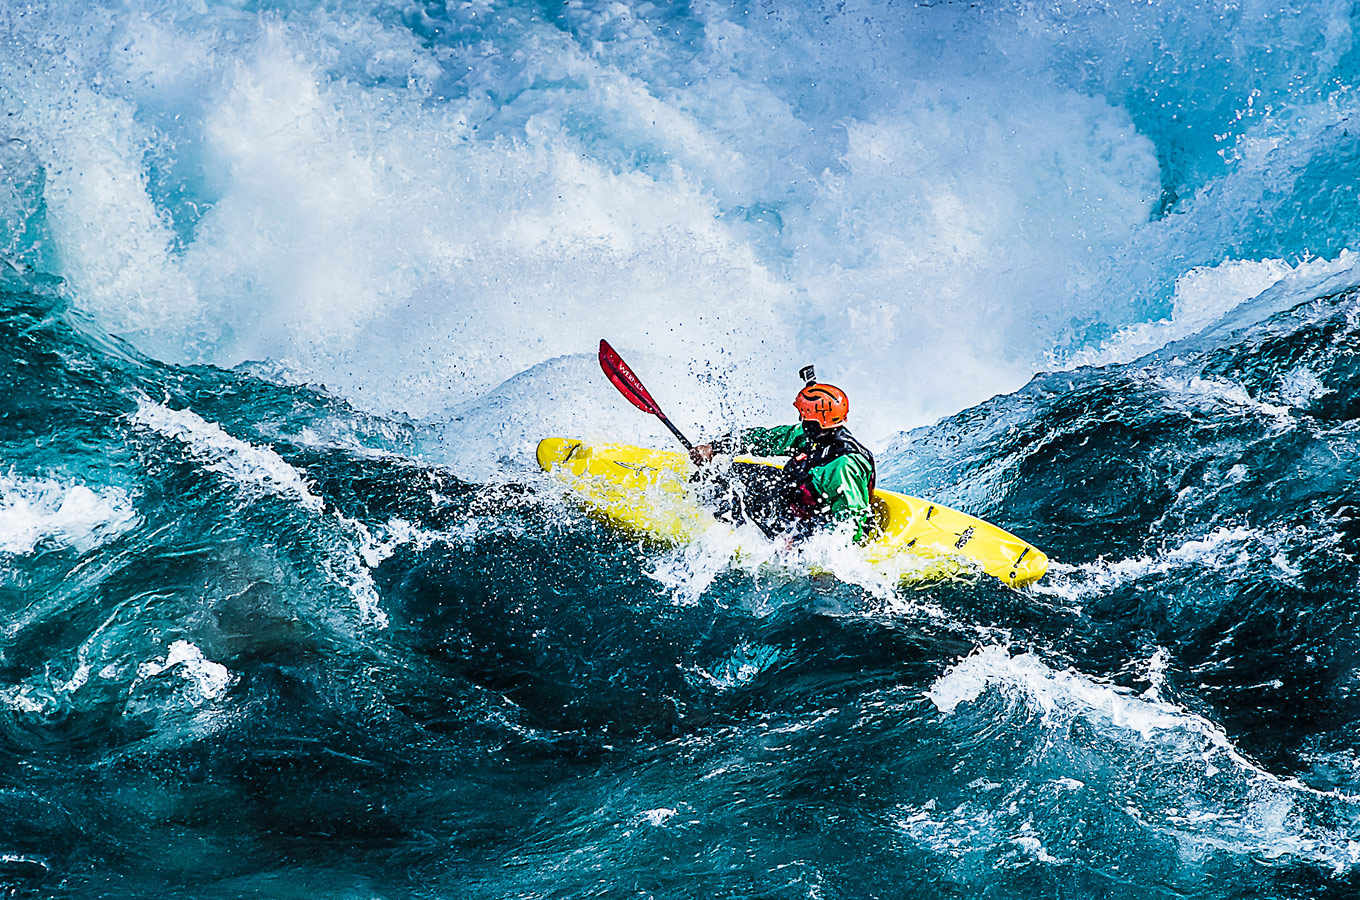 “Adrenaline On Water”, © Claudio Abella, Esquel, Chubut, Argentina, First Place Amateur : Action/Adventure, PDN Adrenaline - Sports and Action Photography